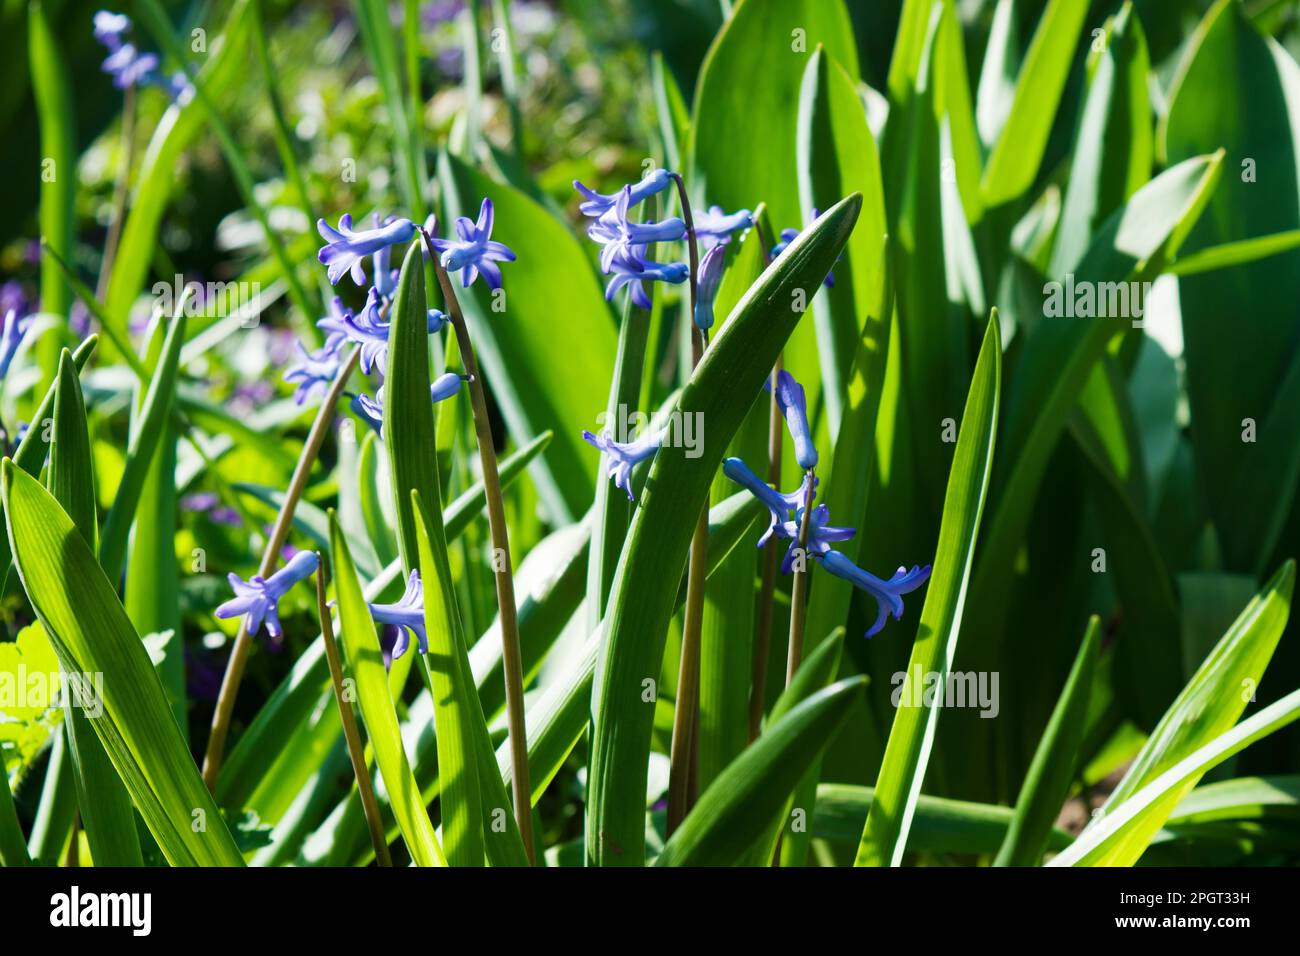 Wild-type Hyacinthus orientalis in garden and home cultivation. As a symbol, it represents prudence, constancy, desire of heaven and peace of mind. Stock Photo